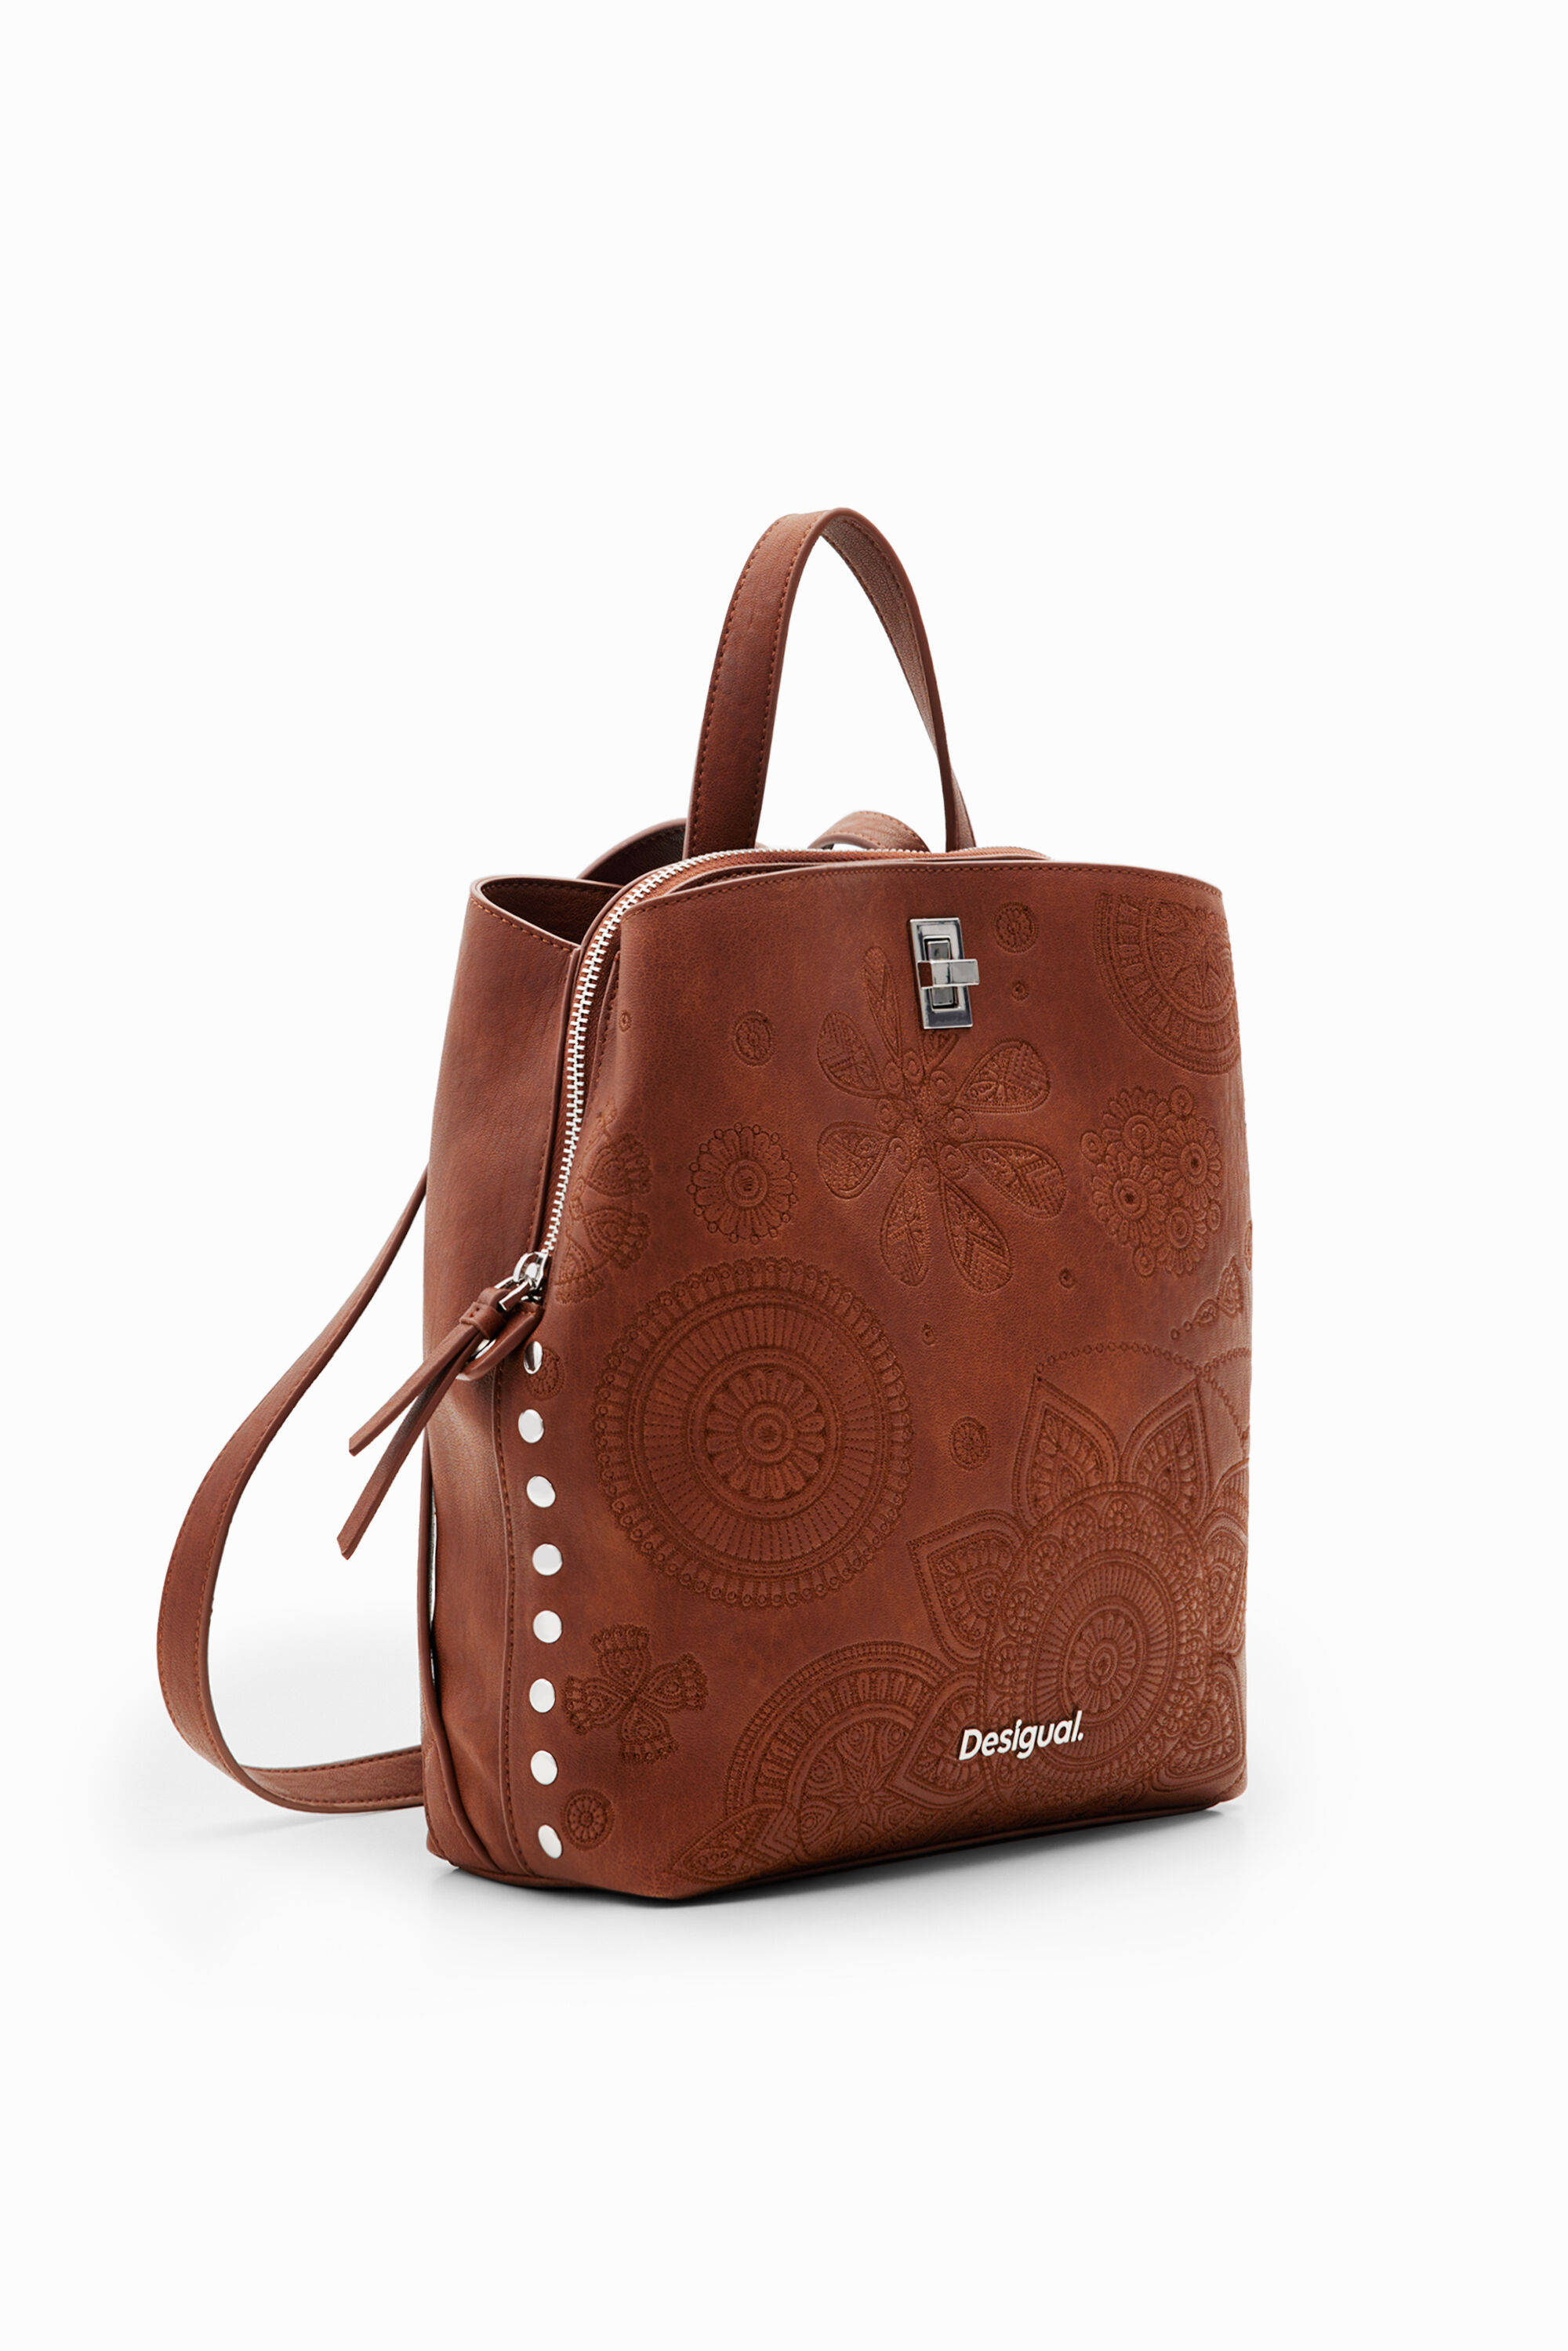 Desigual Small embroidered backpack